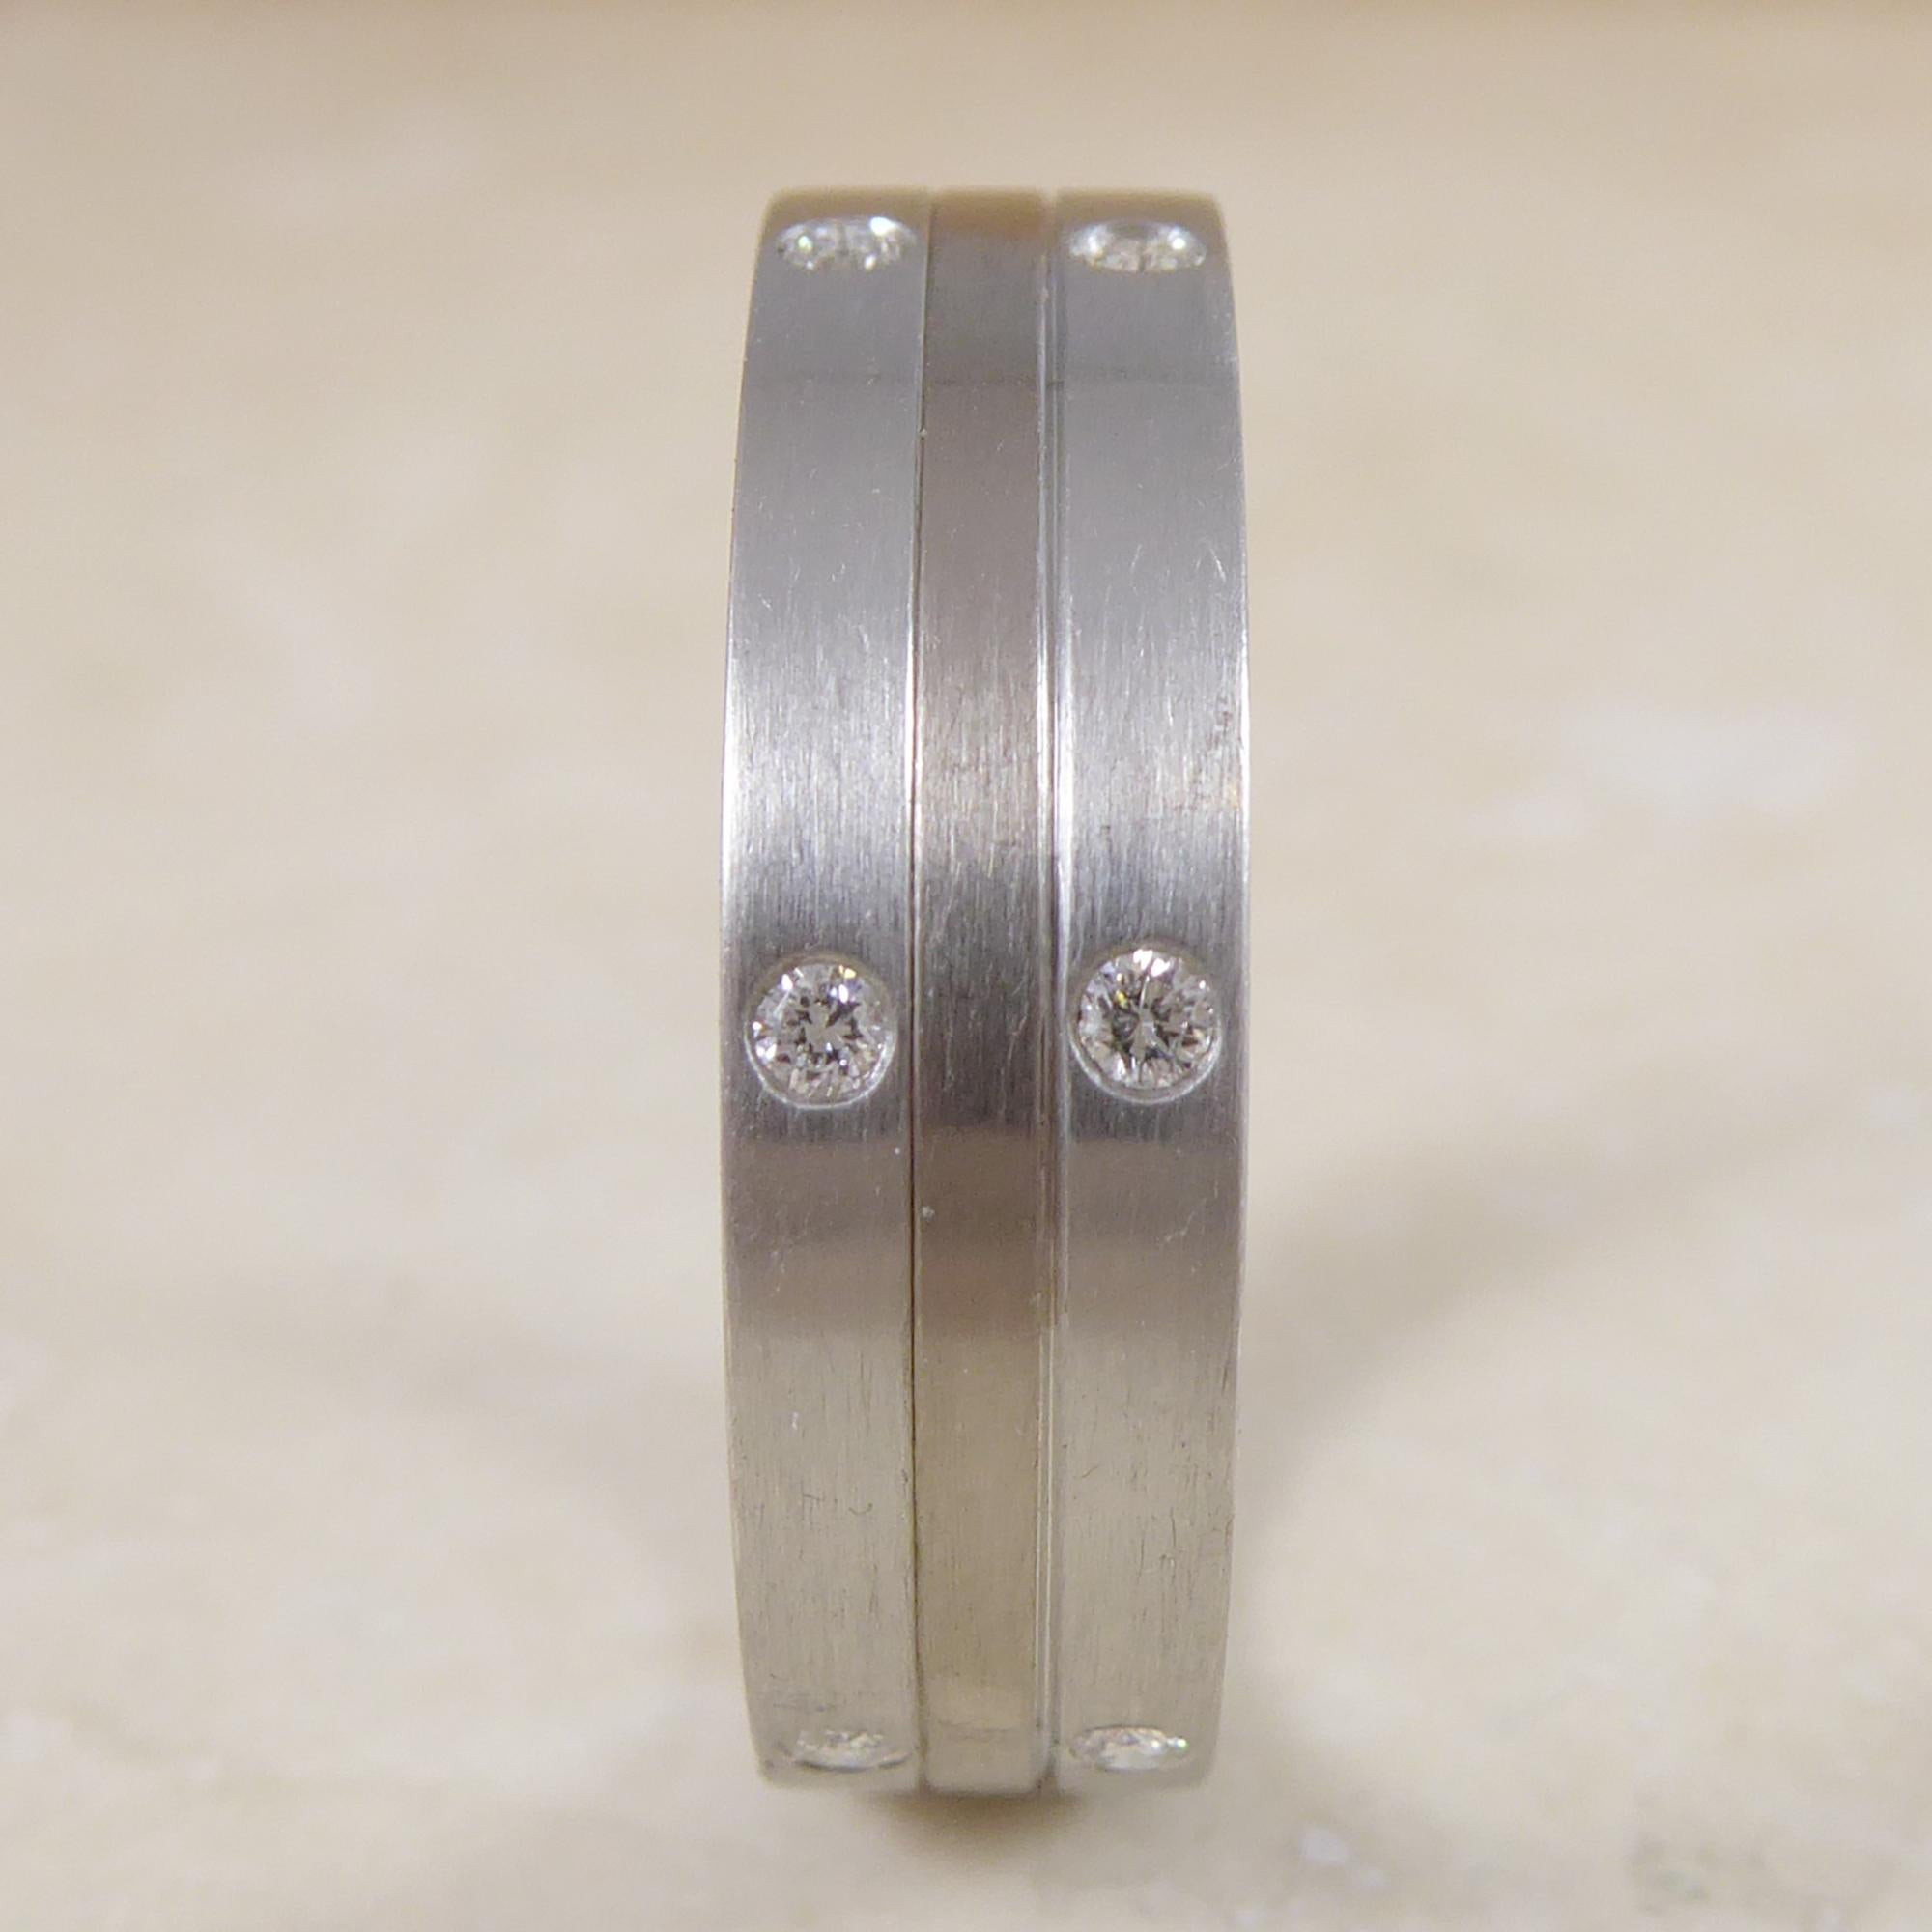 Contemporary design vintage wedding ring, approx. 20 years old and unworn.  The ring comprises three connected, flat cross section white metal bands.  The inner band being platinum with the outer band each side being white gold.  The ring has a